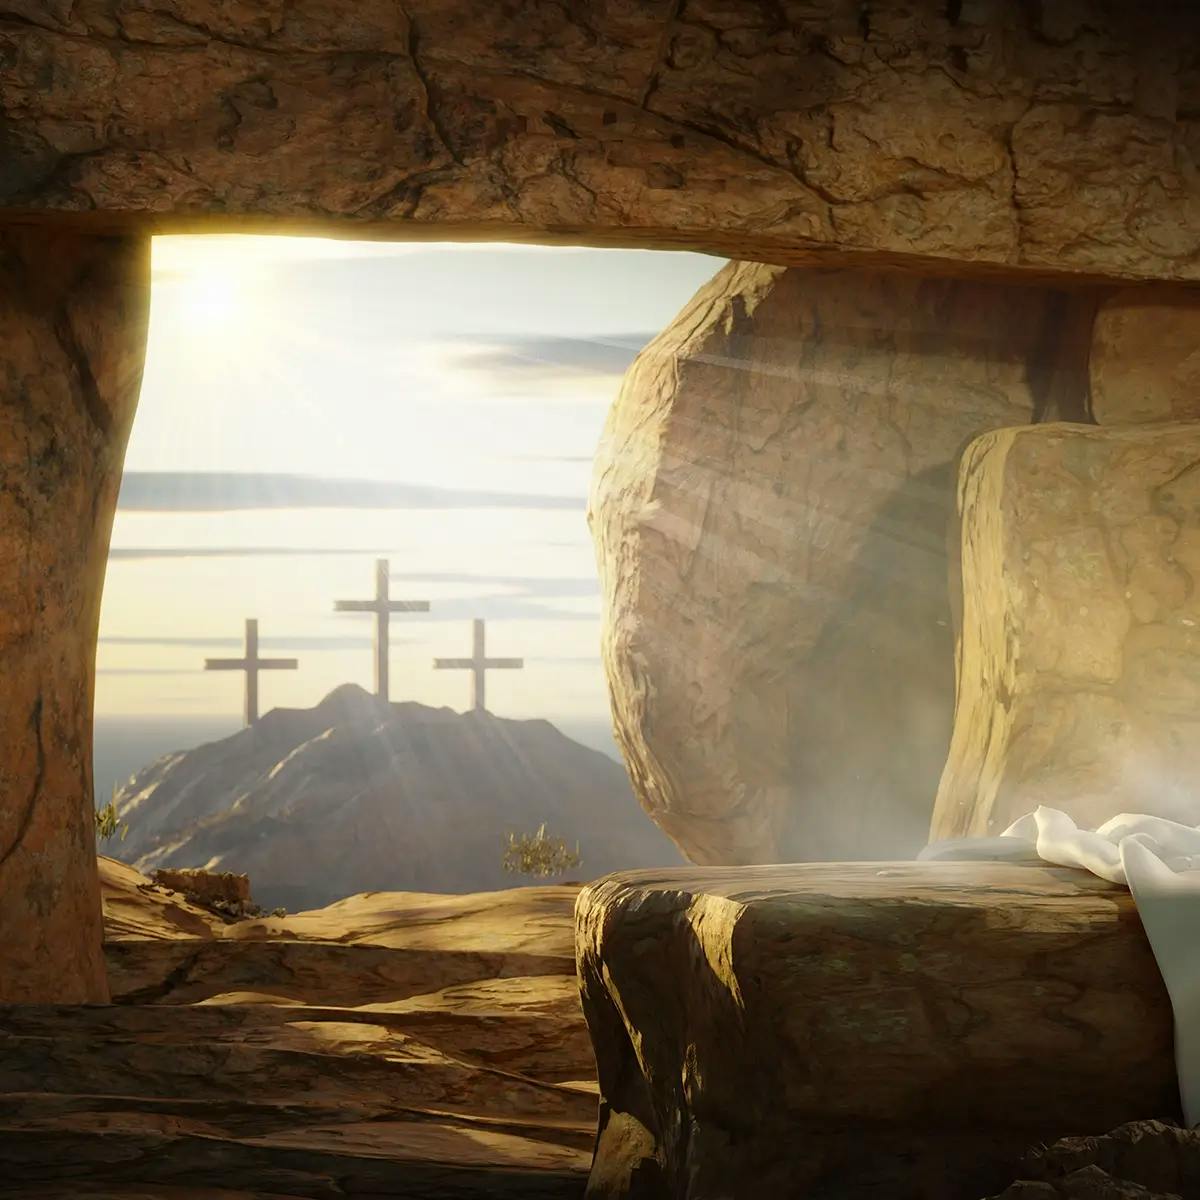 Easter illustration of empty tomb of Jesus Christ, with three crosses on hill symbolizing crucifixion and resurrection.